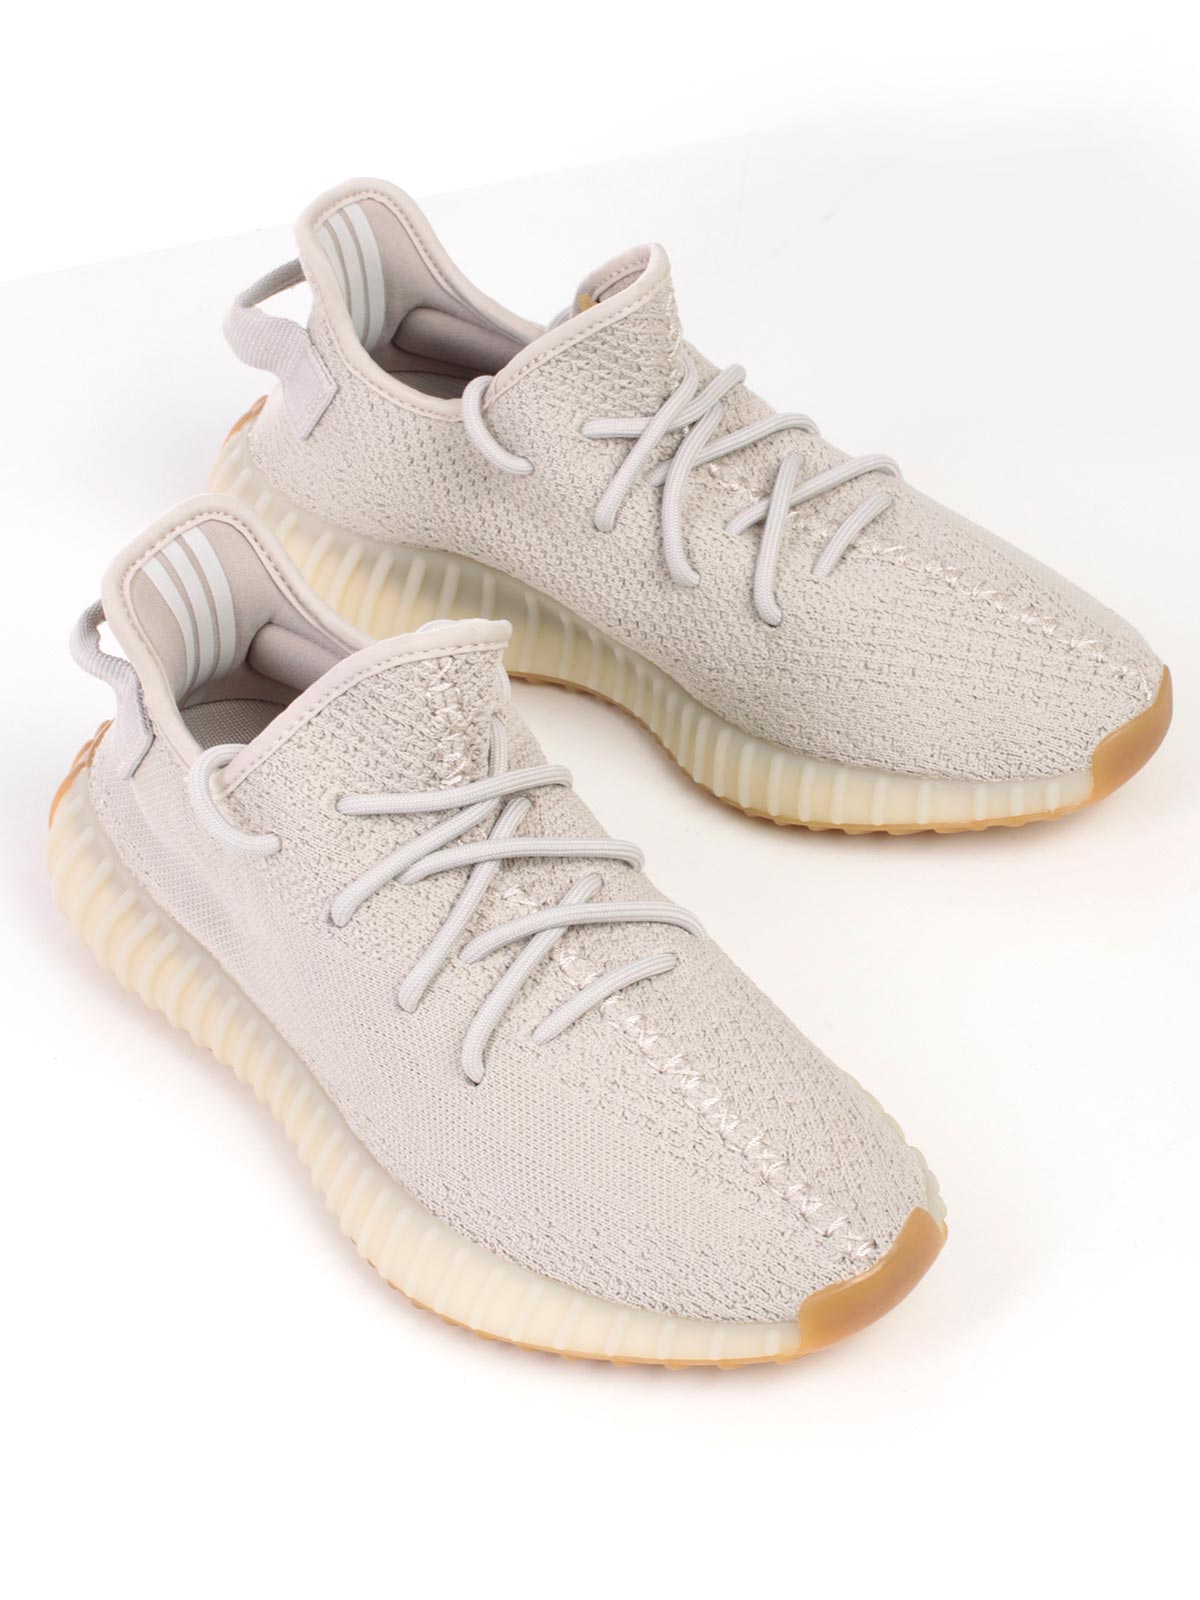 Cheap Yeezy 350 Boost V2 Shoes Aaa Quality031